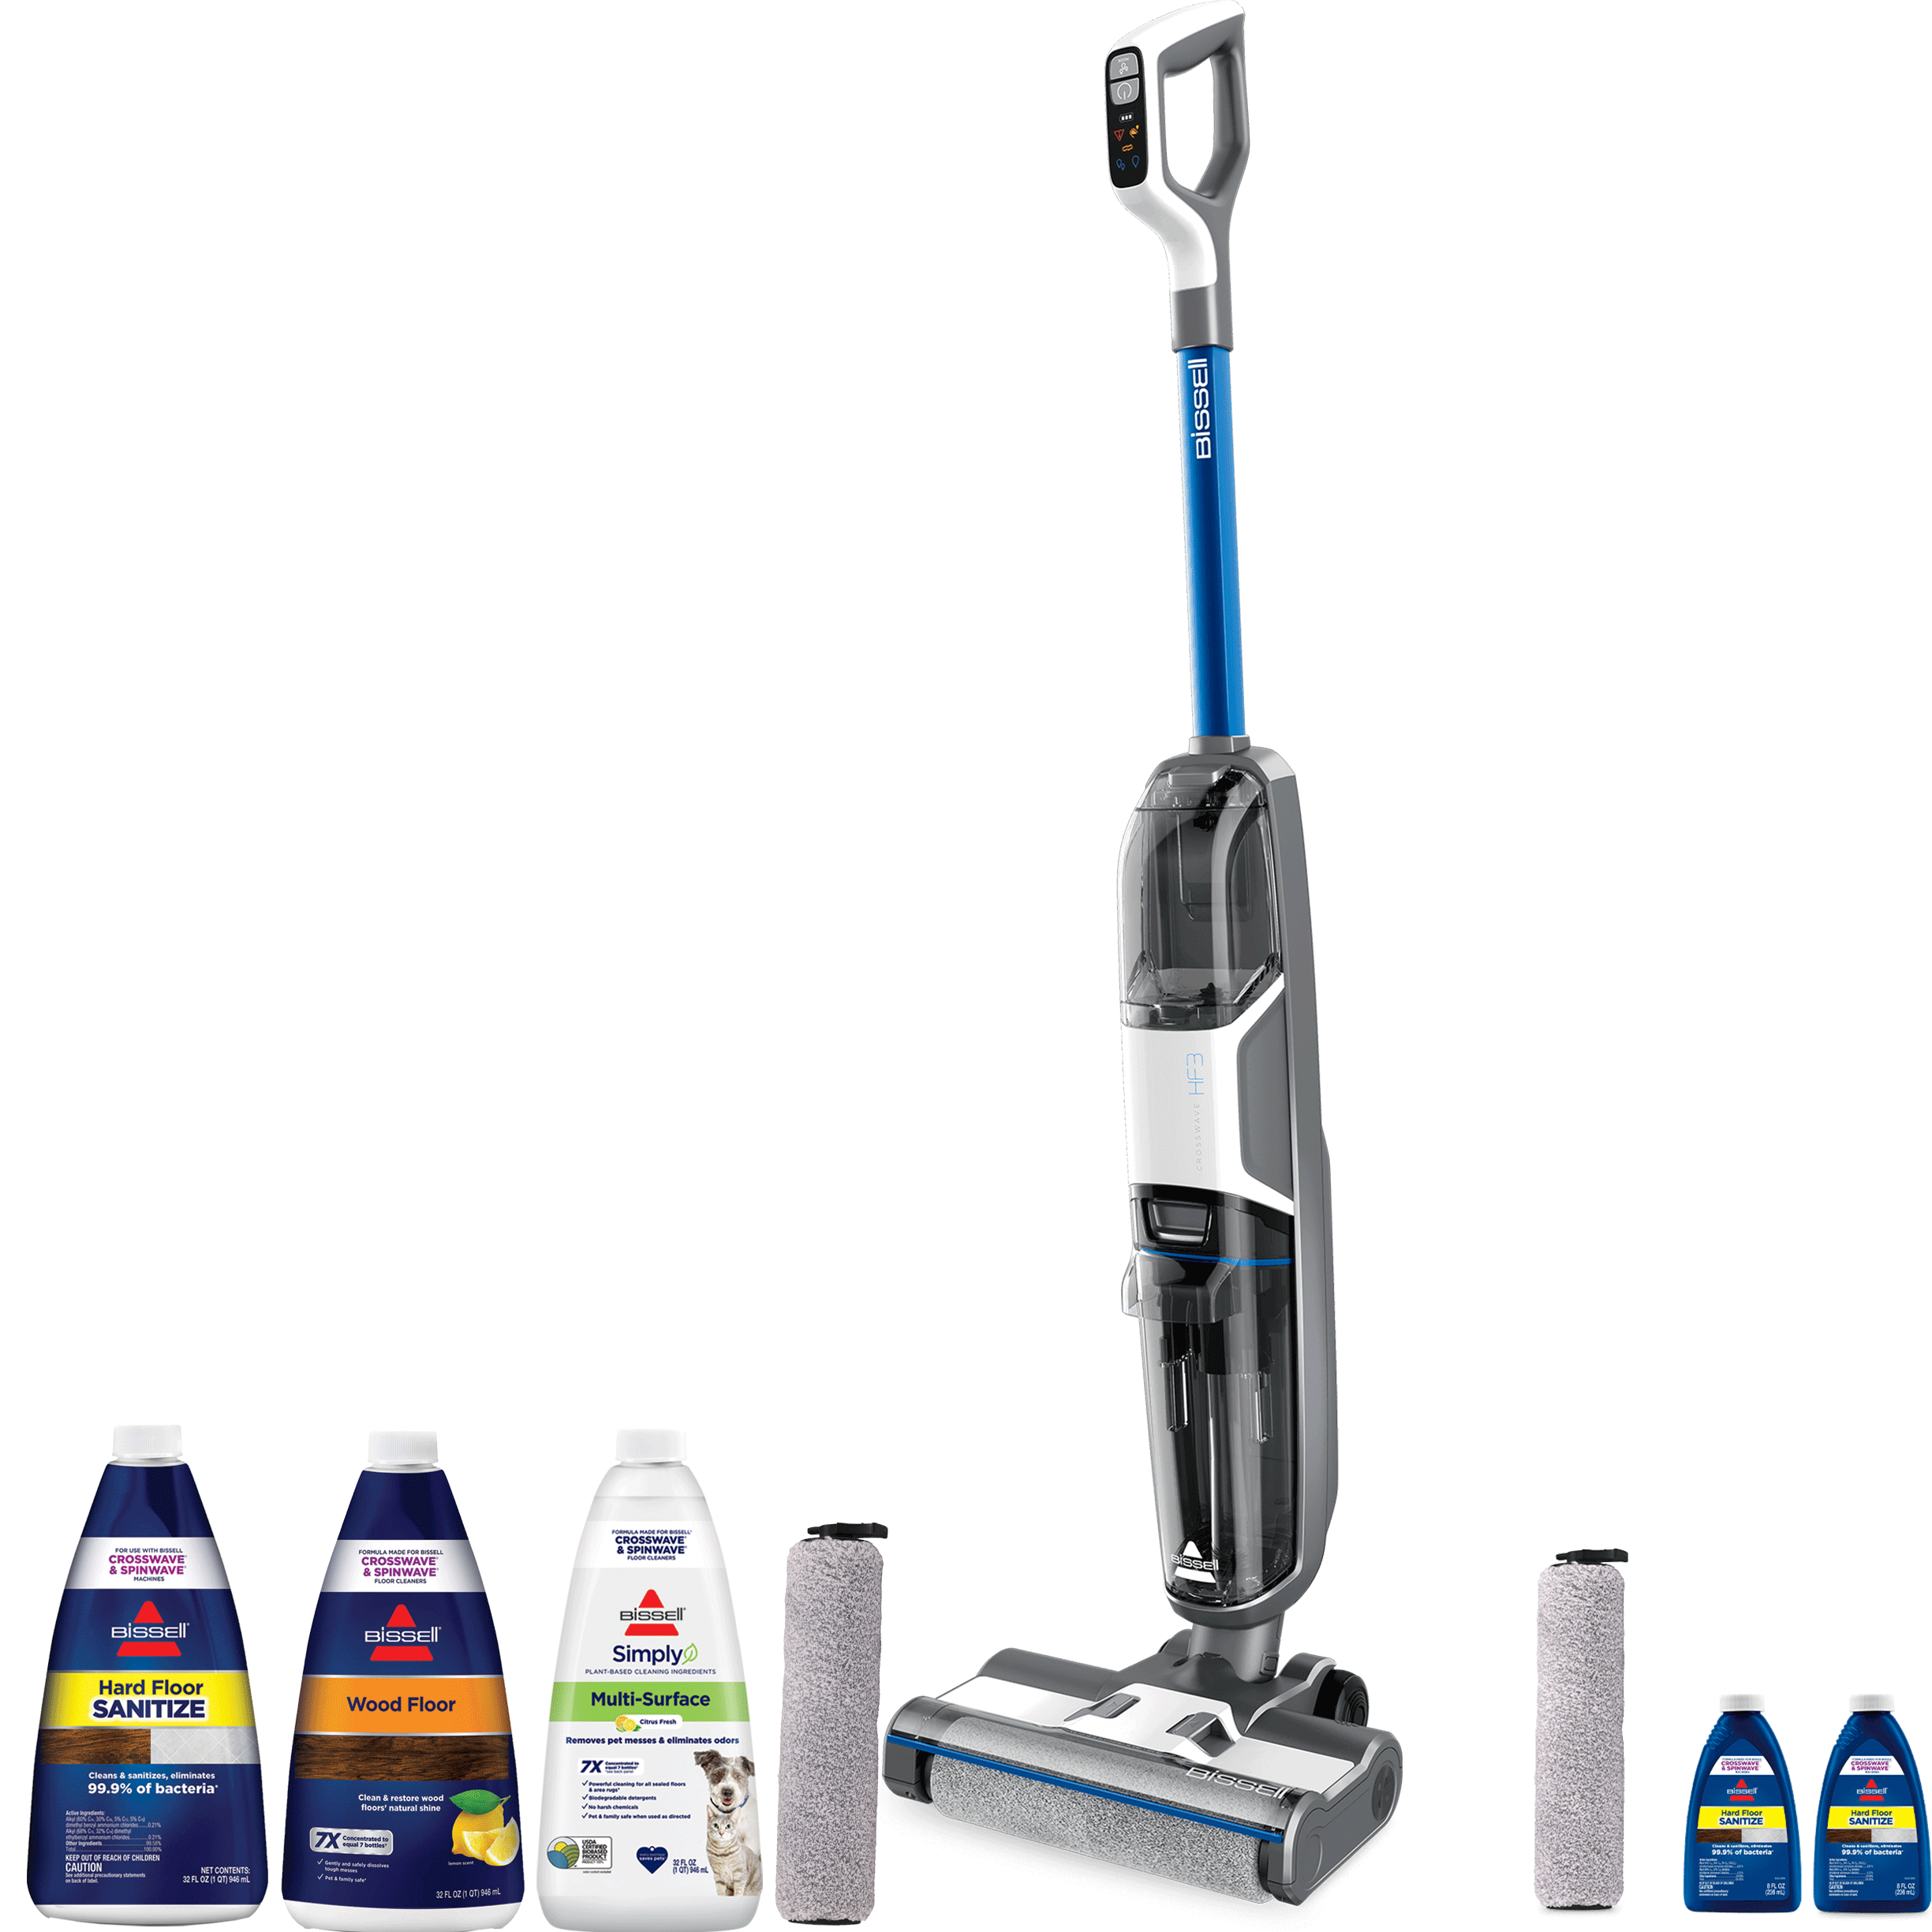 Bissell CrossWave HF3 Cordless Multi-Surface Wet Dry Vacuum